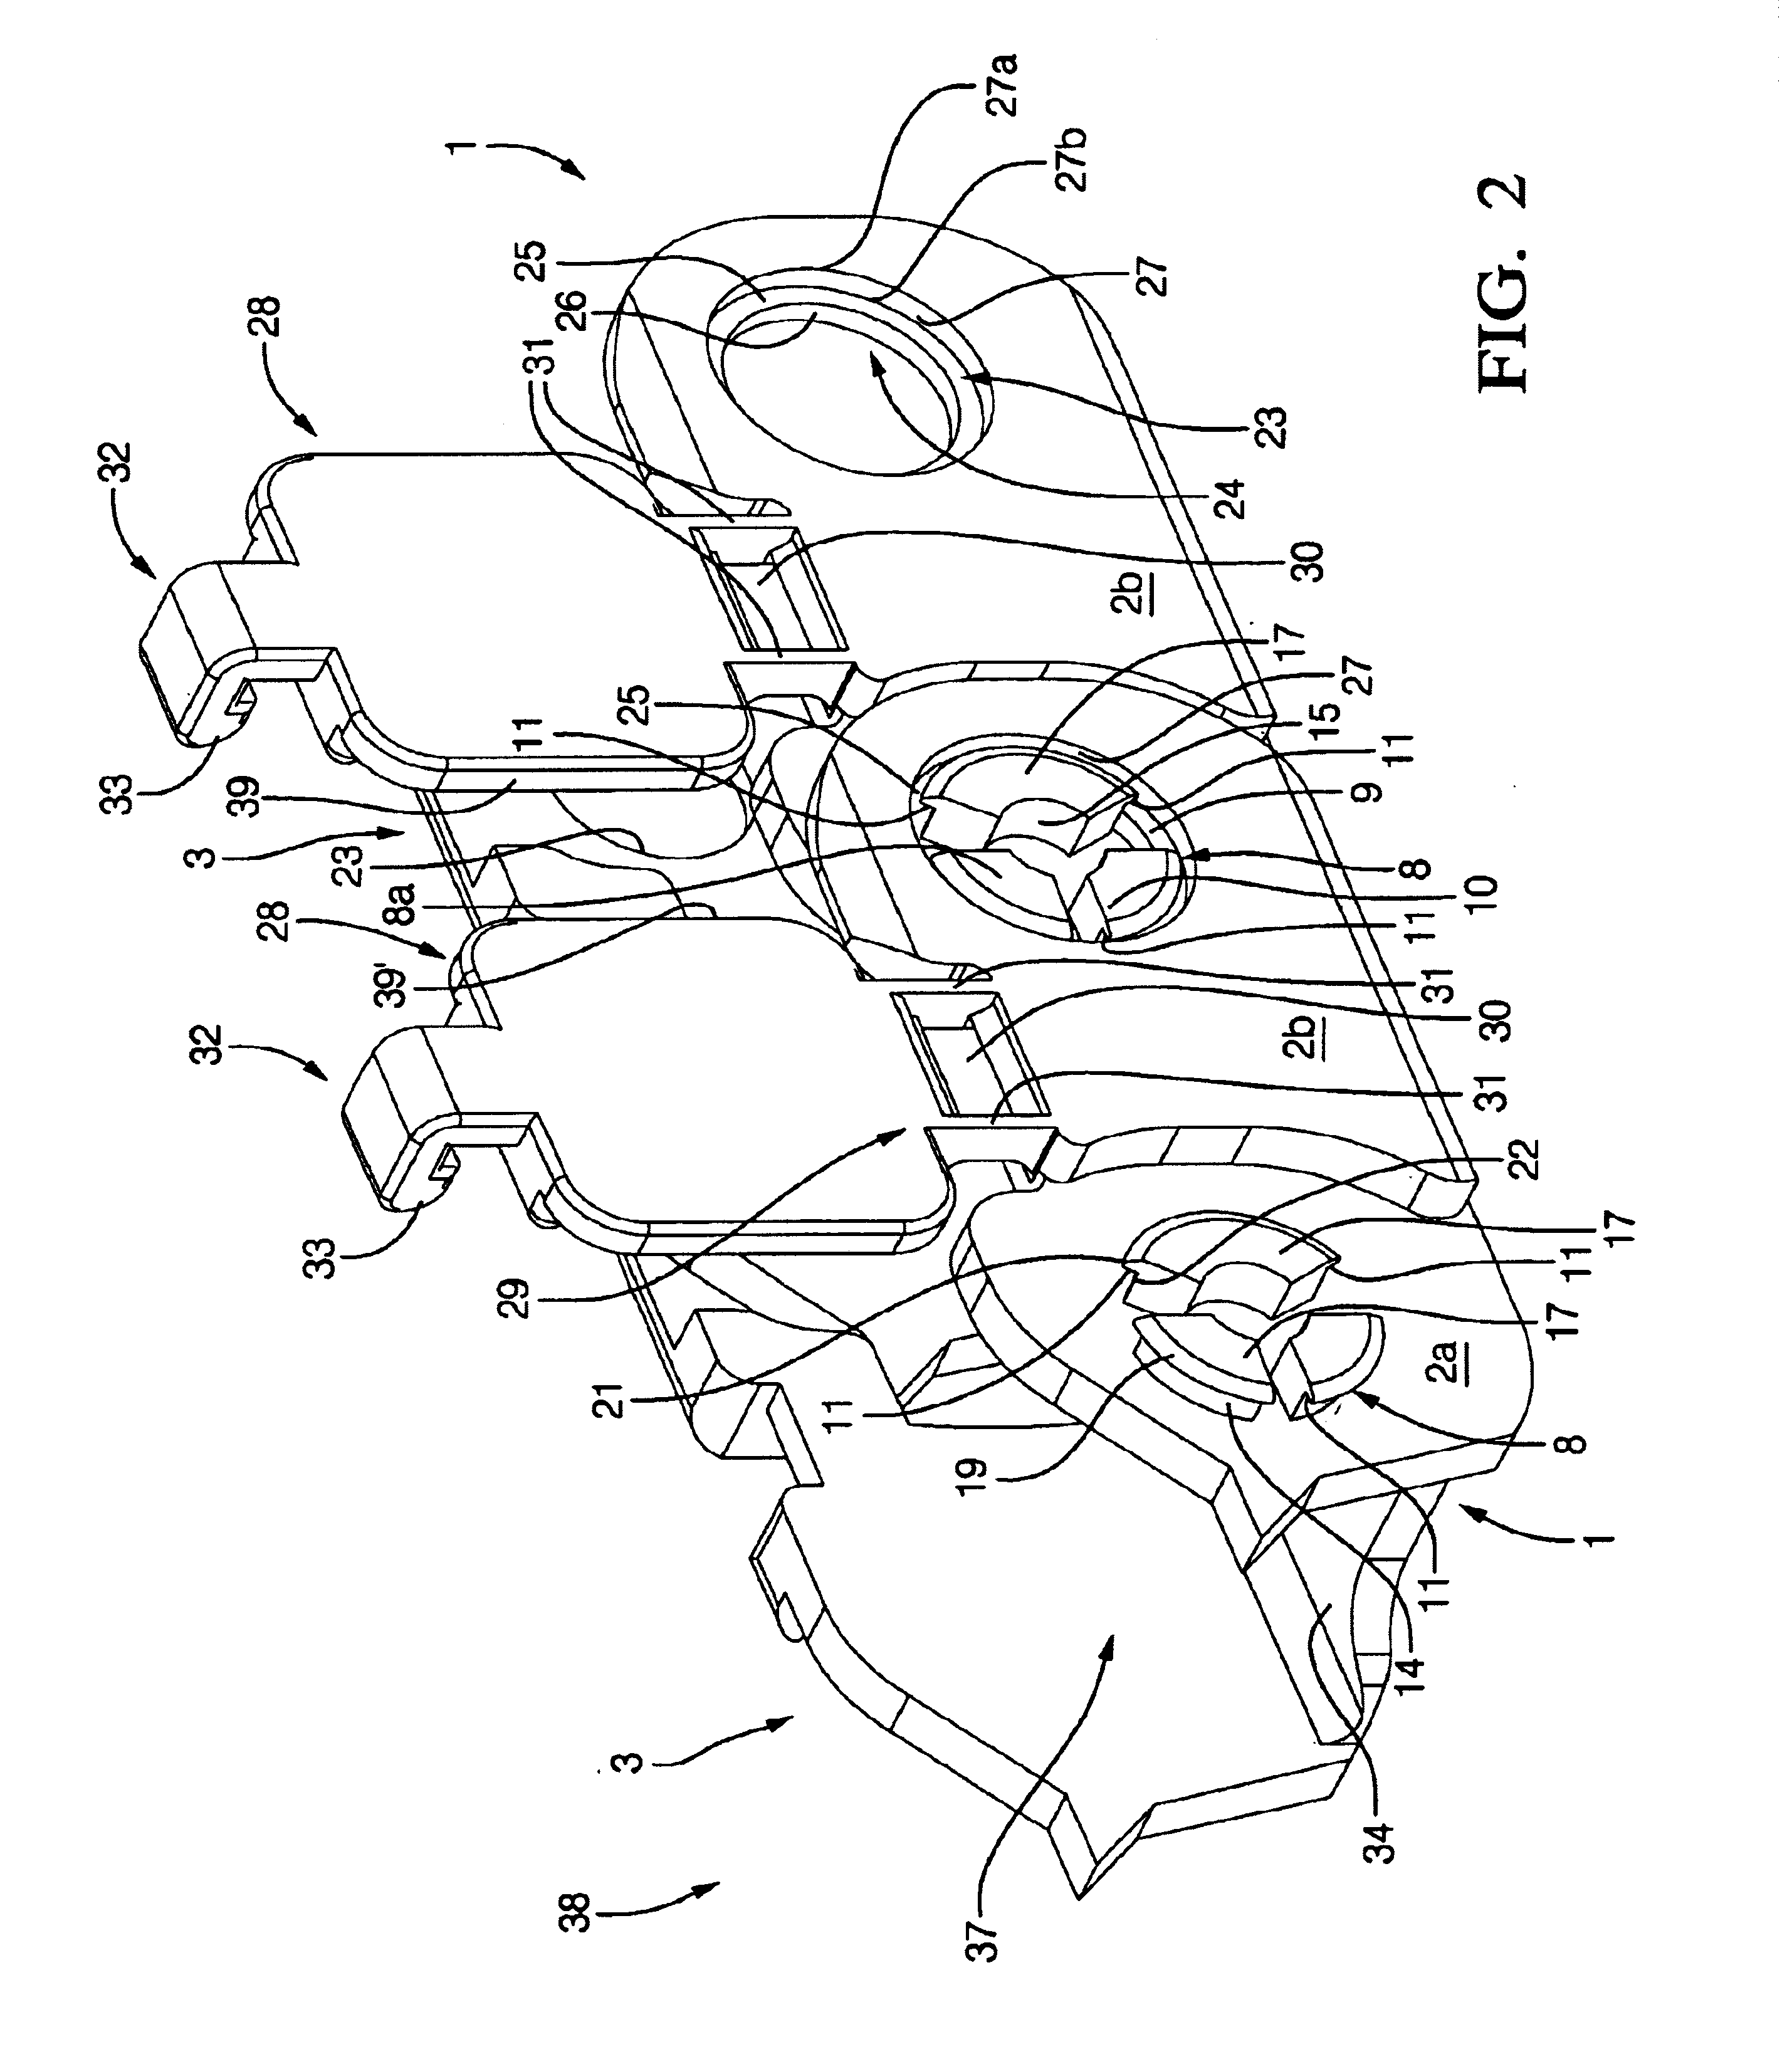 Chain links and cable carrier chains containing same